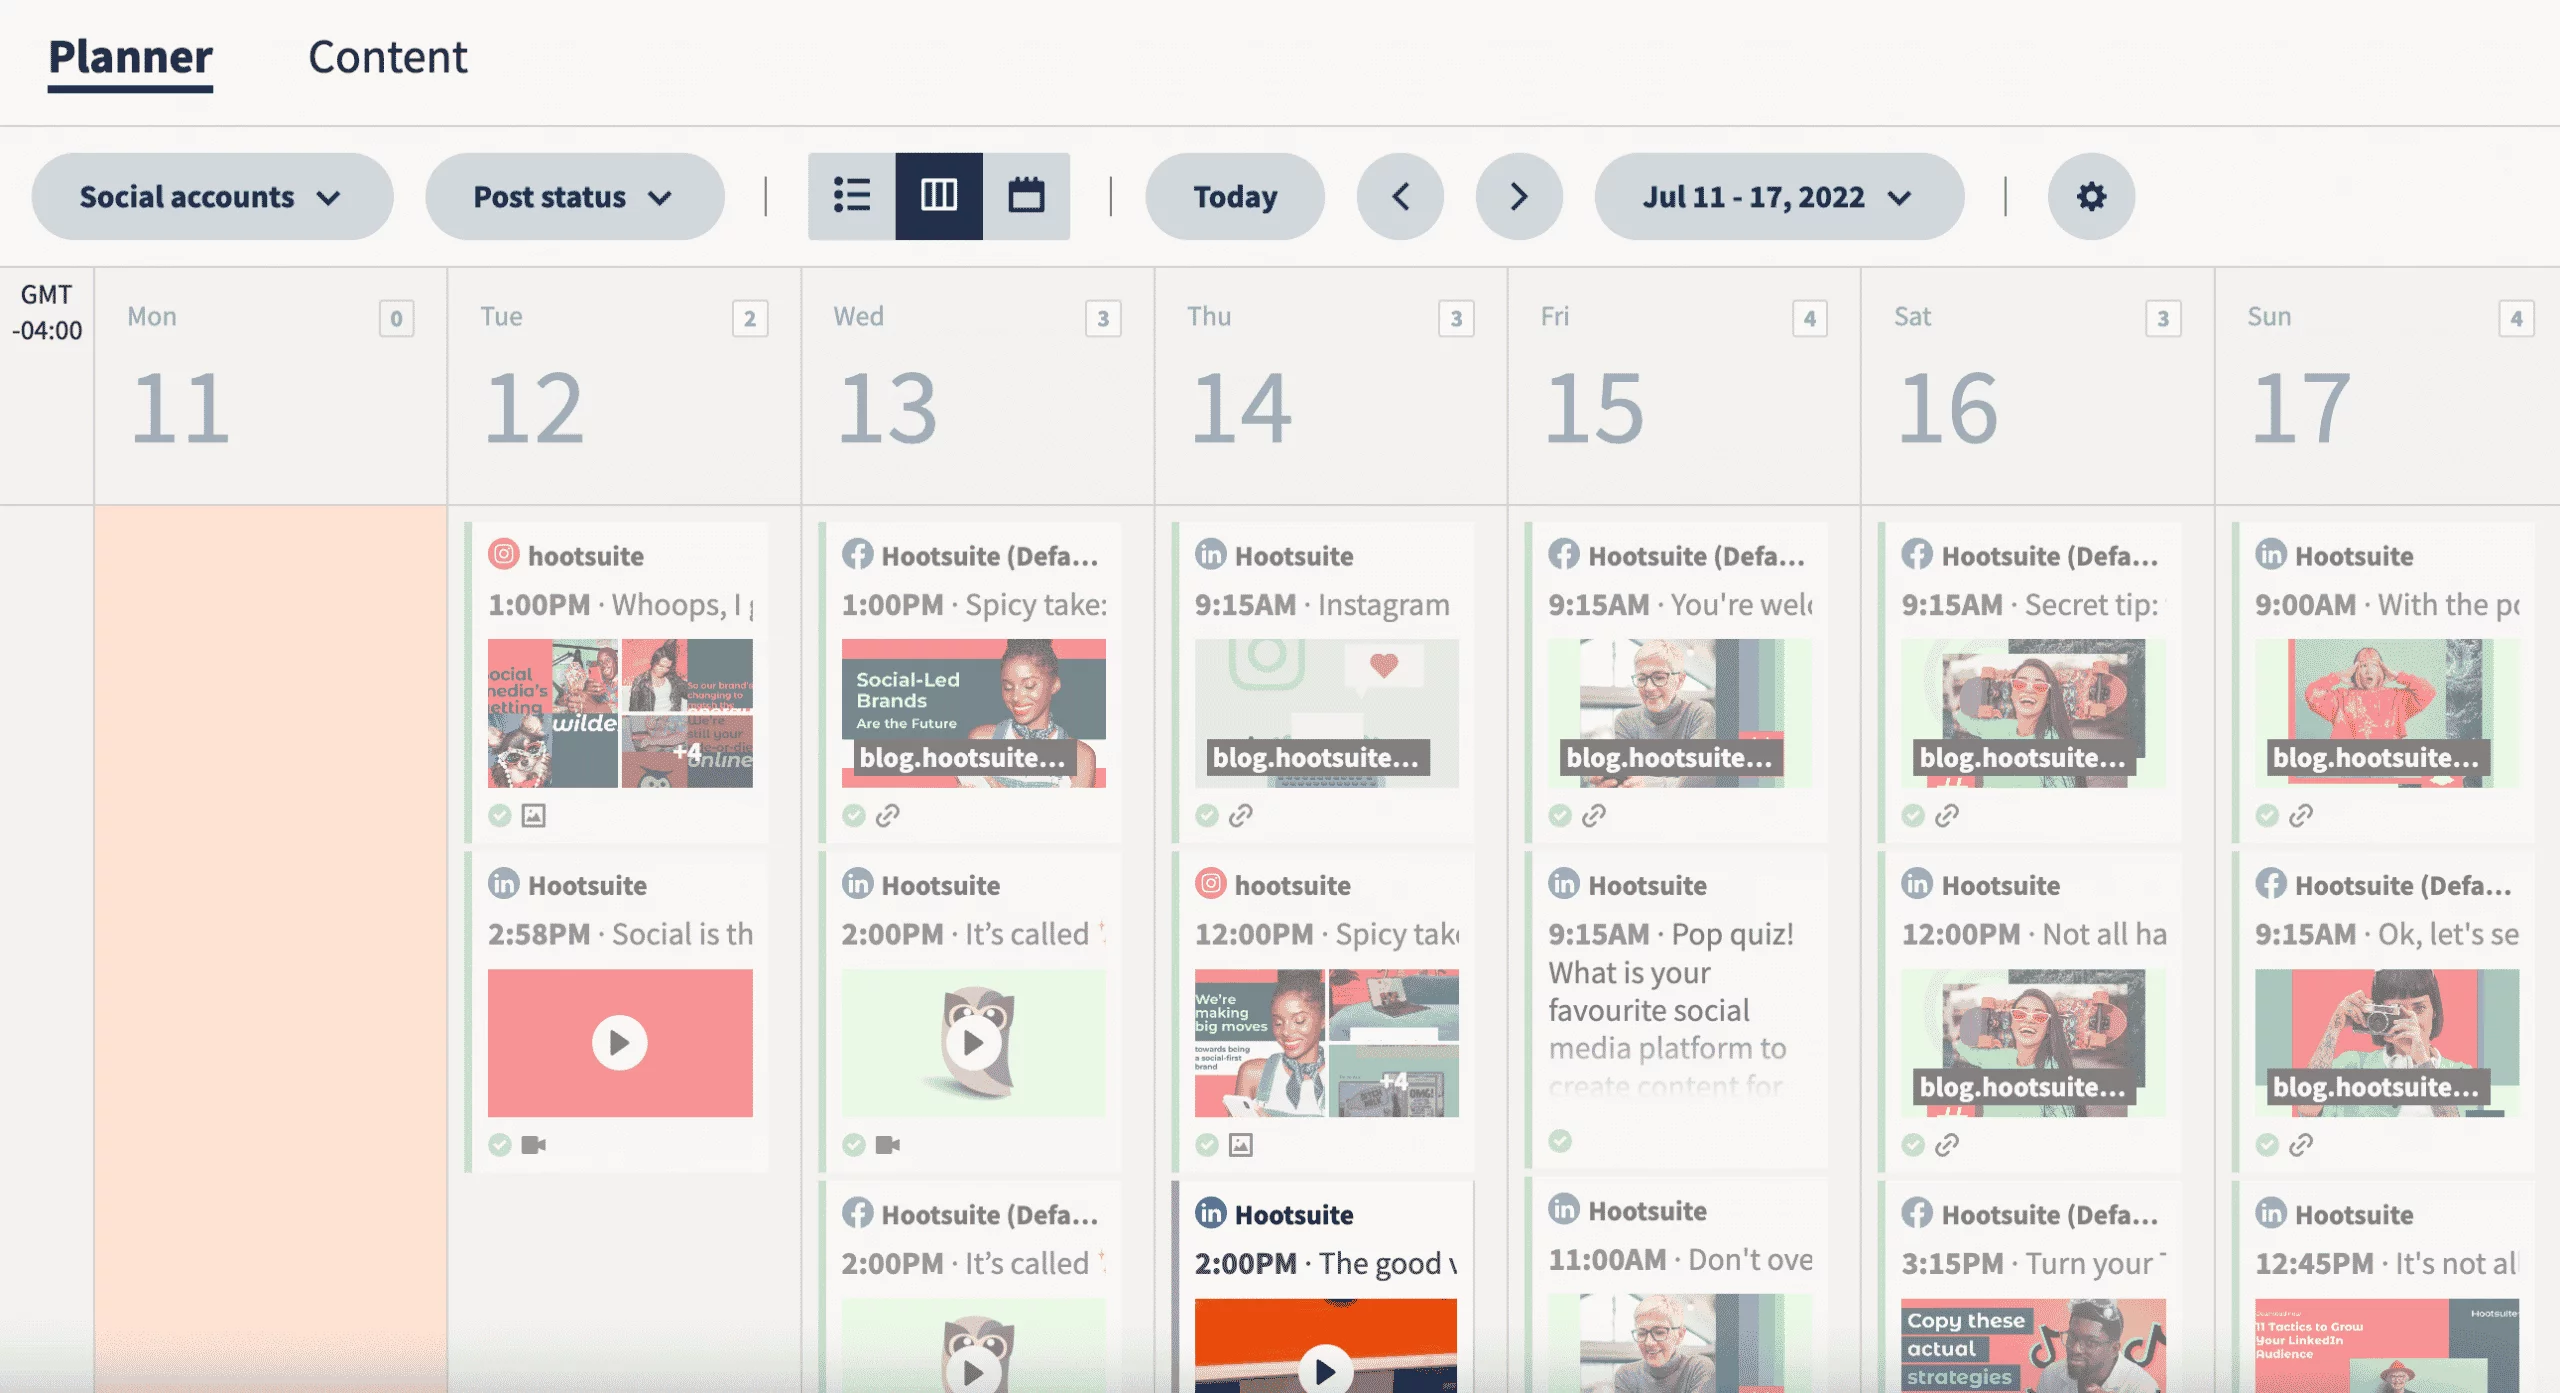 Hootsuite's content planner with scheduled posts